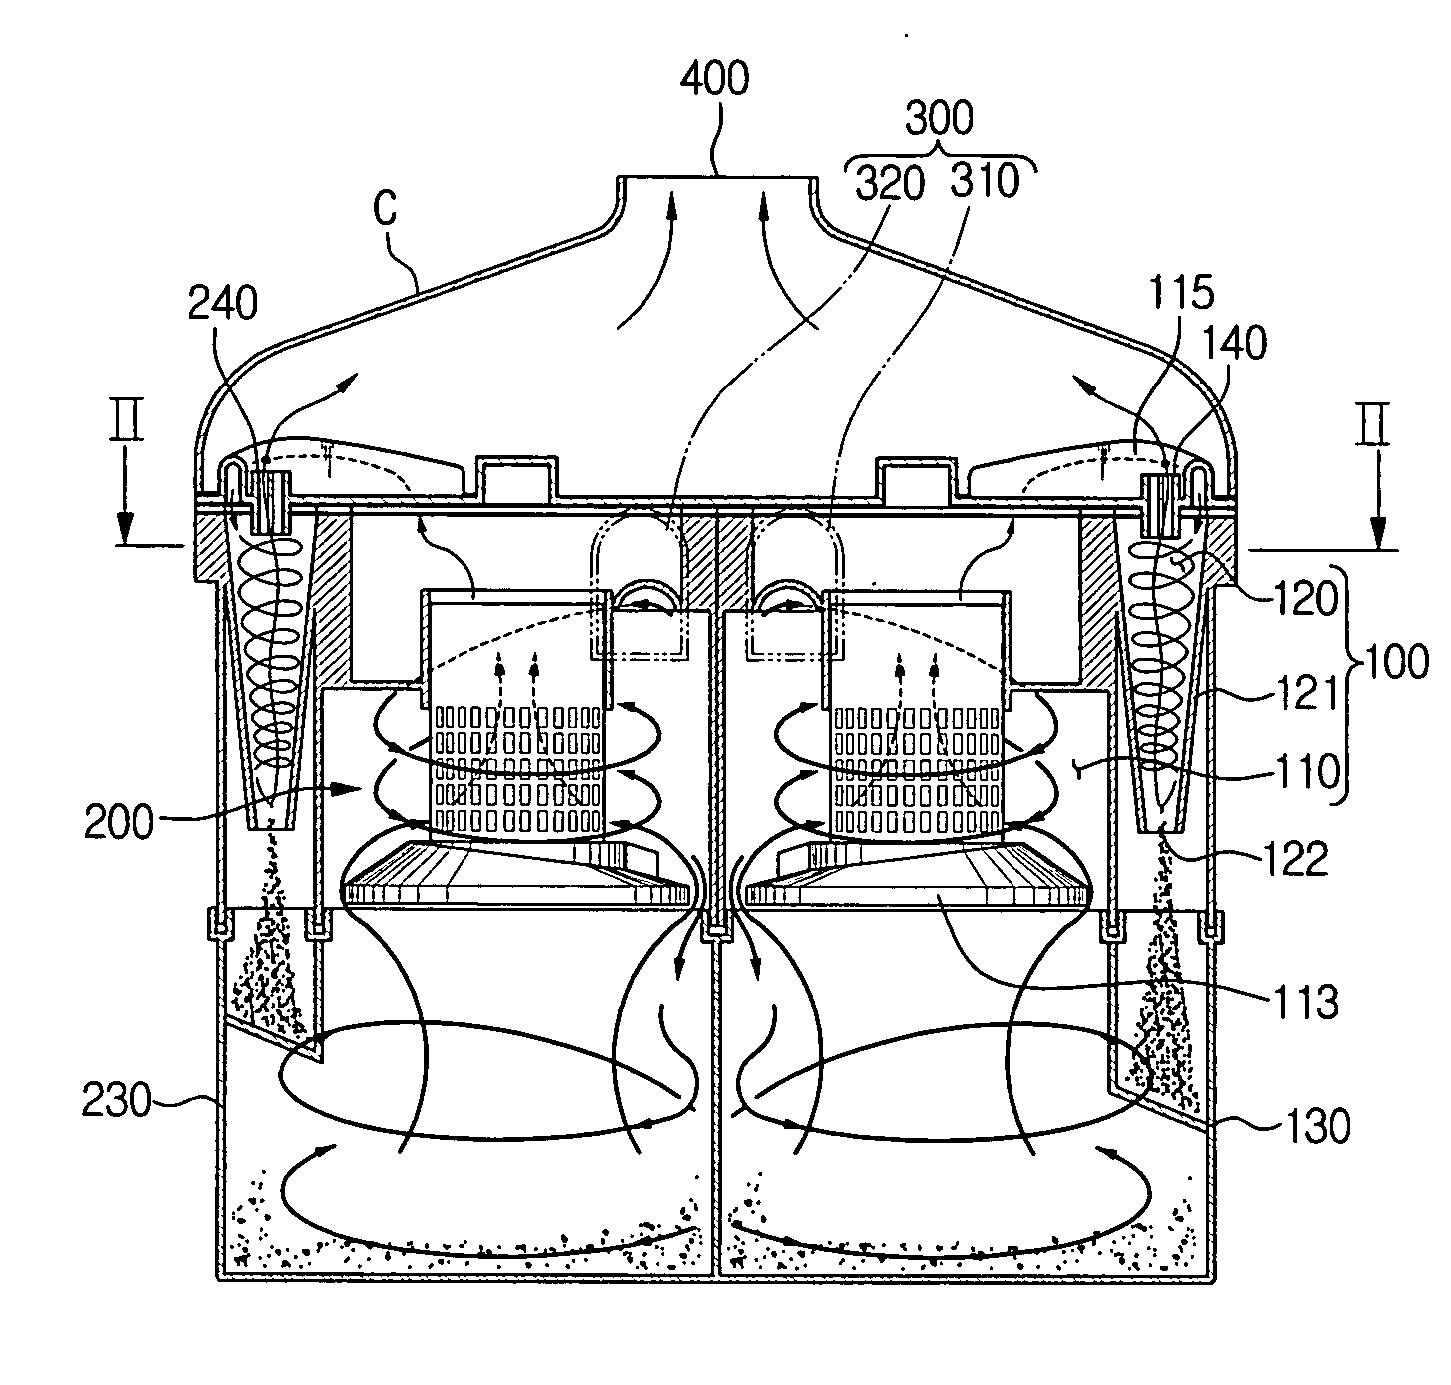 Multi-cyclone dust collecting apparatus